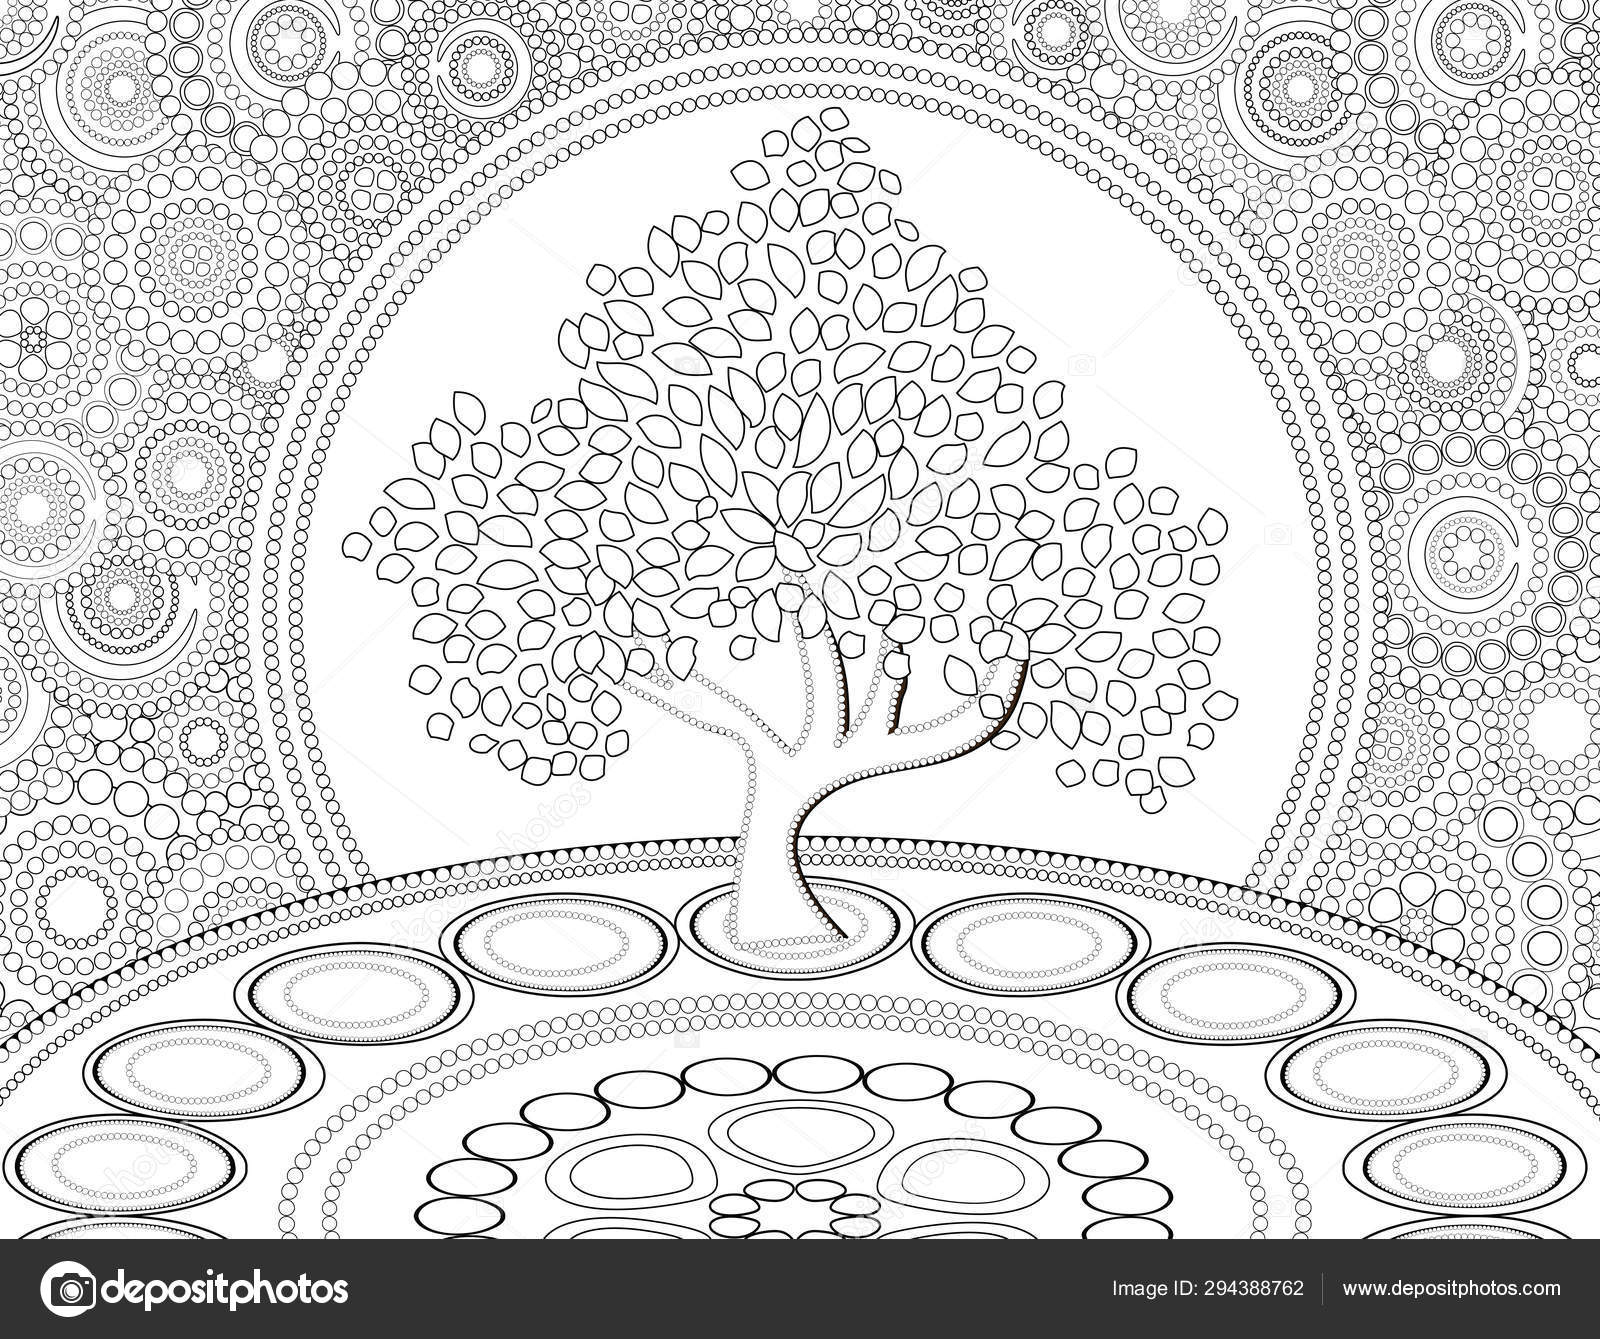 Circle tree life coloring page stock photo by smk